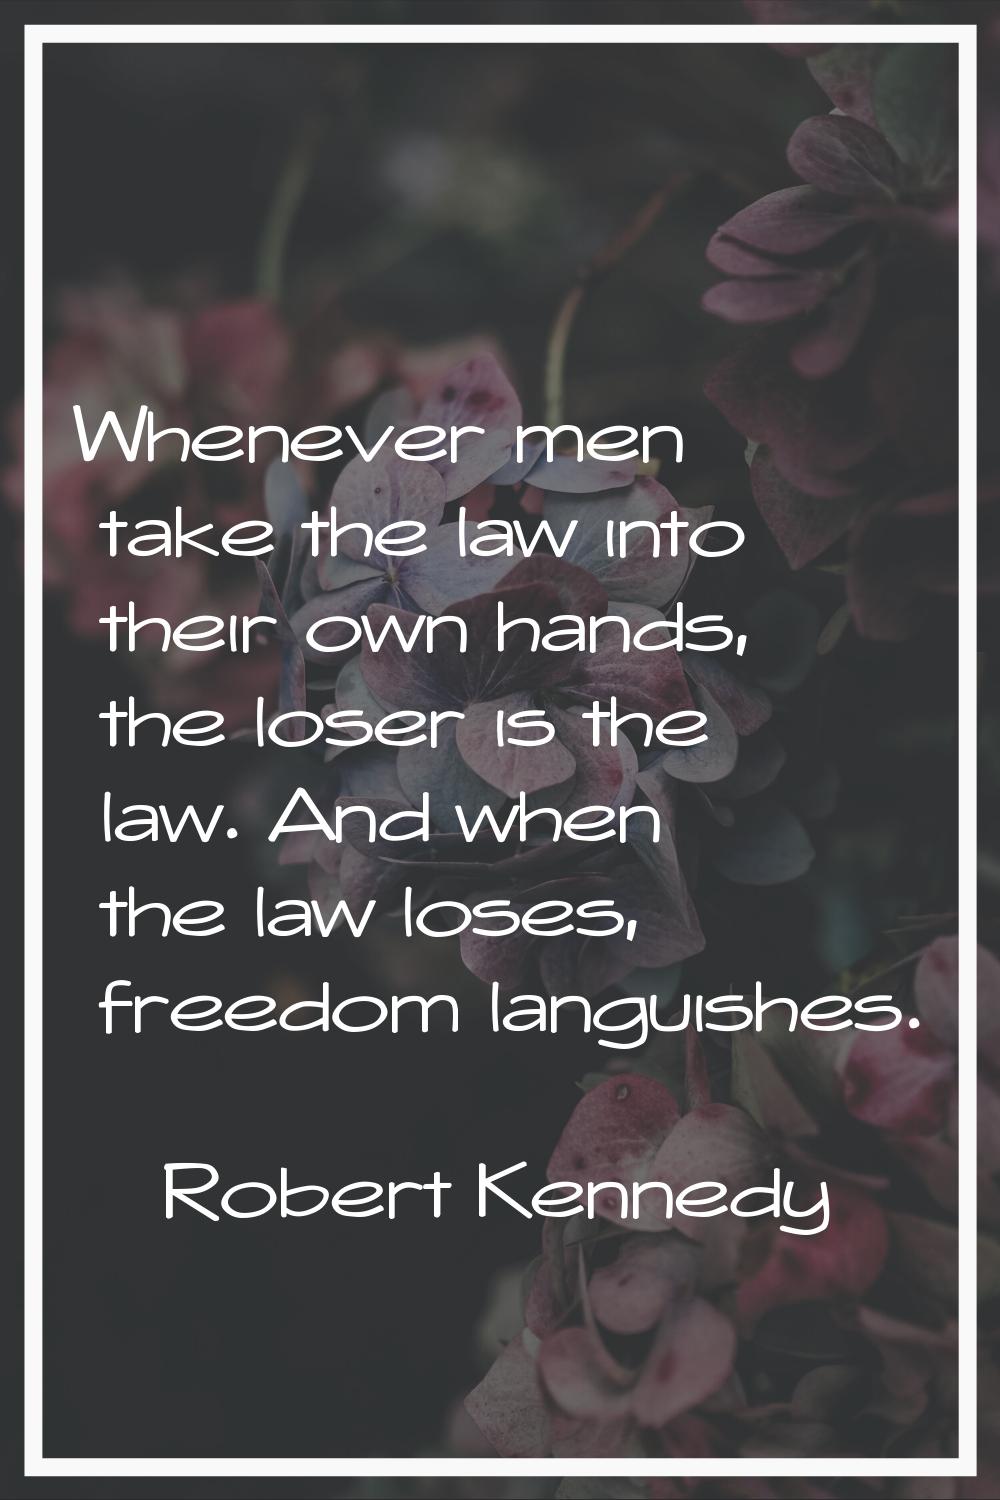 Whenever men take the law into their own hands, the loser is the law. And when the law loses, freed